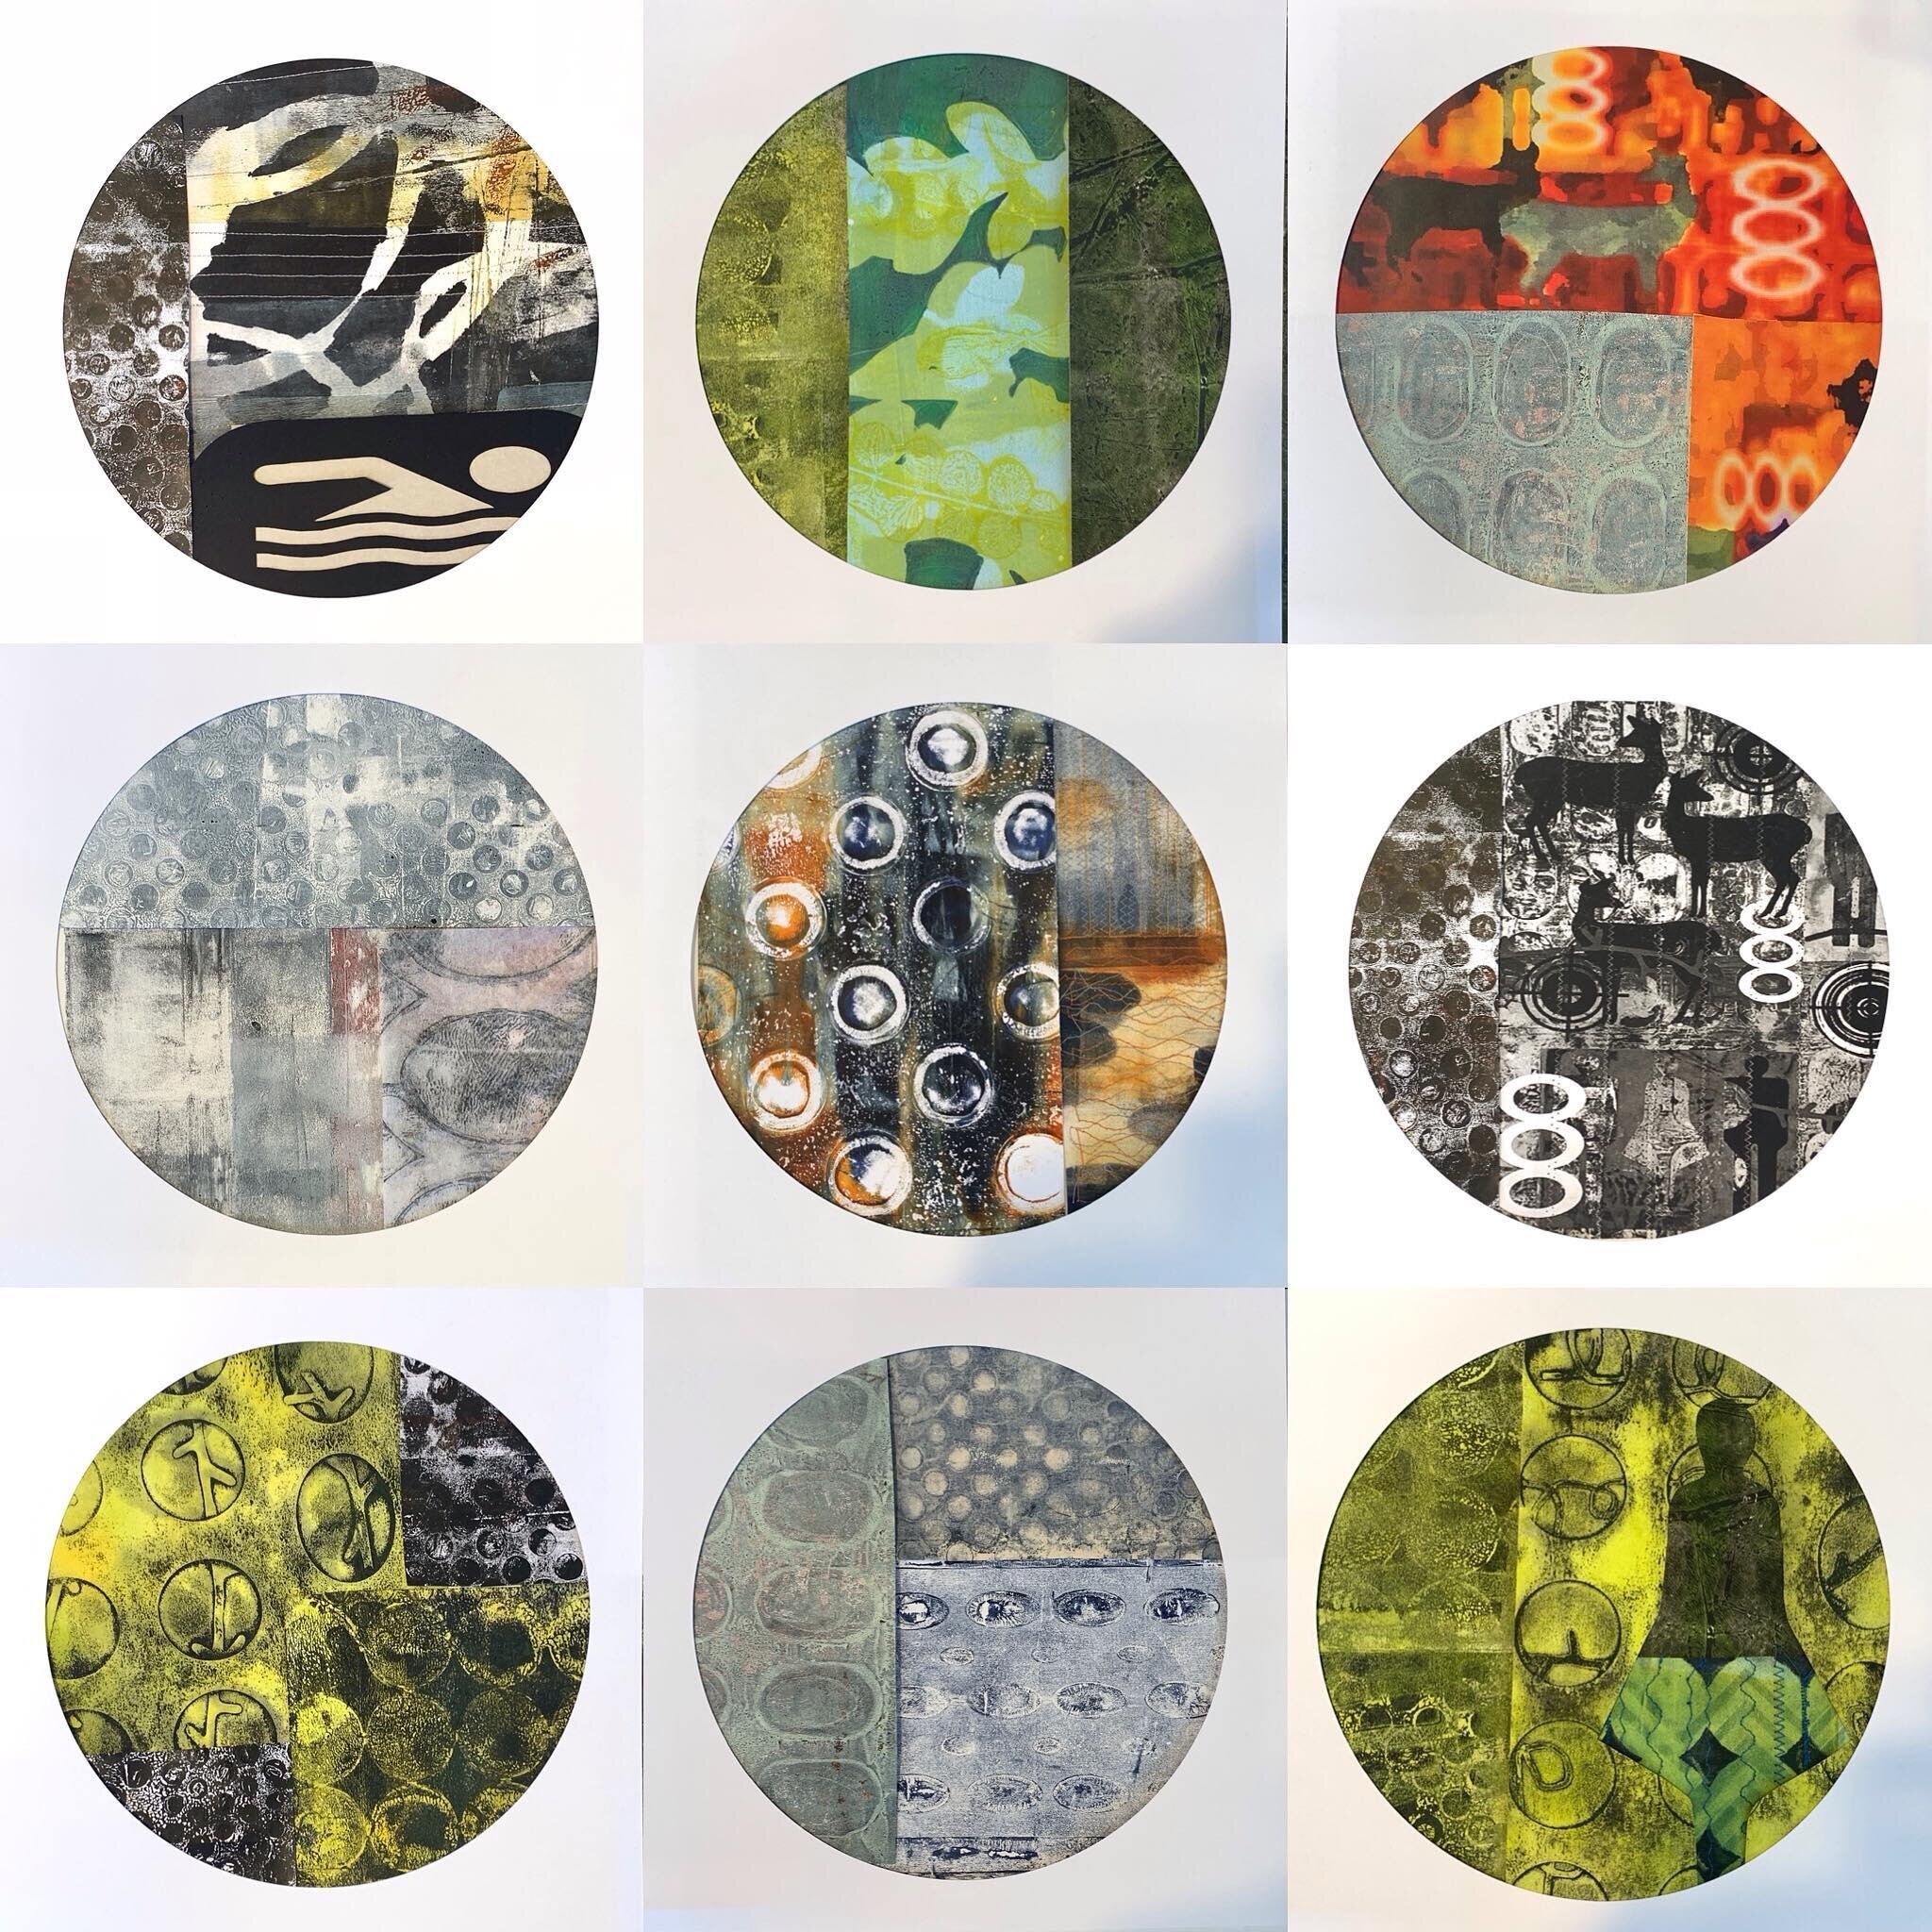 This week I&rsquo;m exploring 8&rdquo; circular compositions for my #monoprint collages. I&rsquo;m inspired by @cordula.kagemann and the other artists in my @mastrius mentorship group! @mastrius.community 

#collageartwork #contemporarycollage #conte